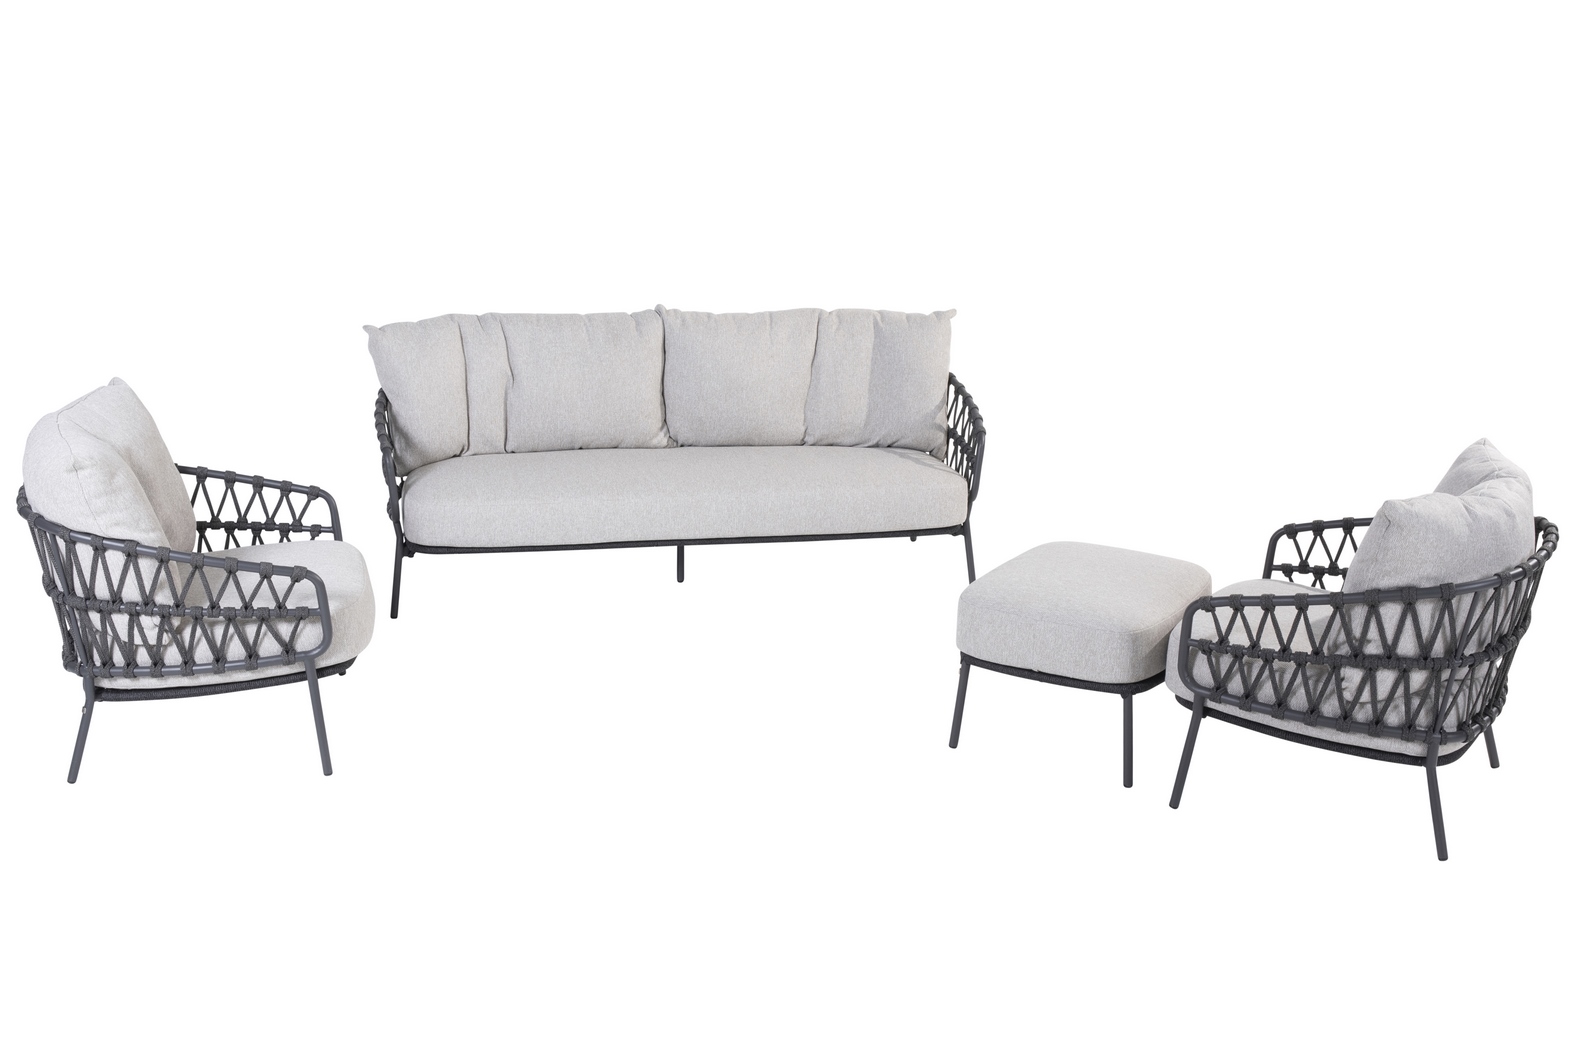 213891-213892-213893__Calpi_living_set_and_footstool_without_table_011.jpg